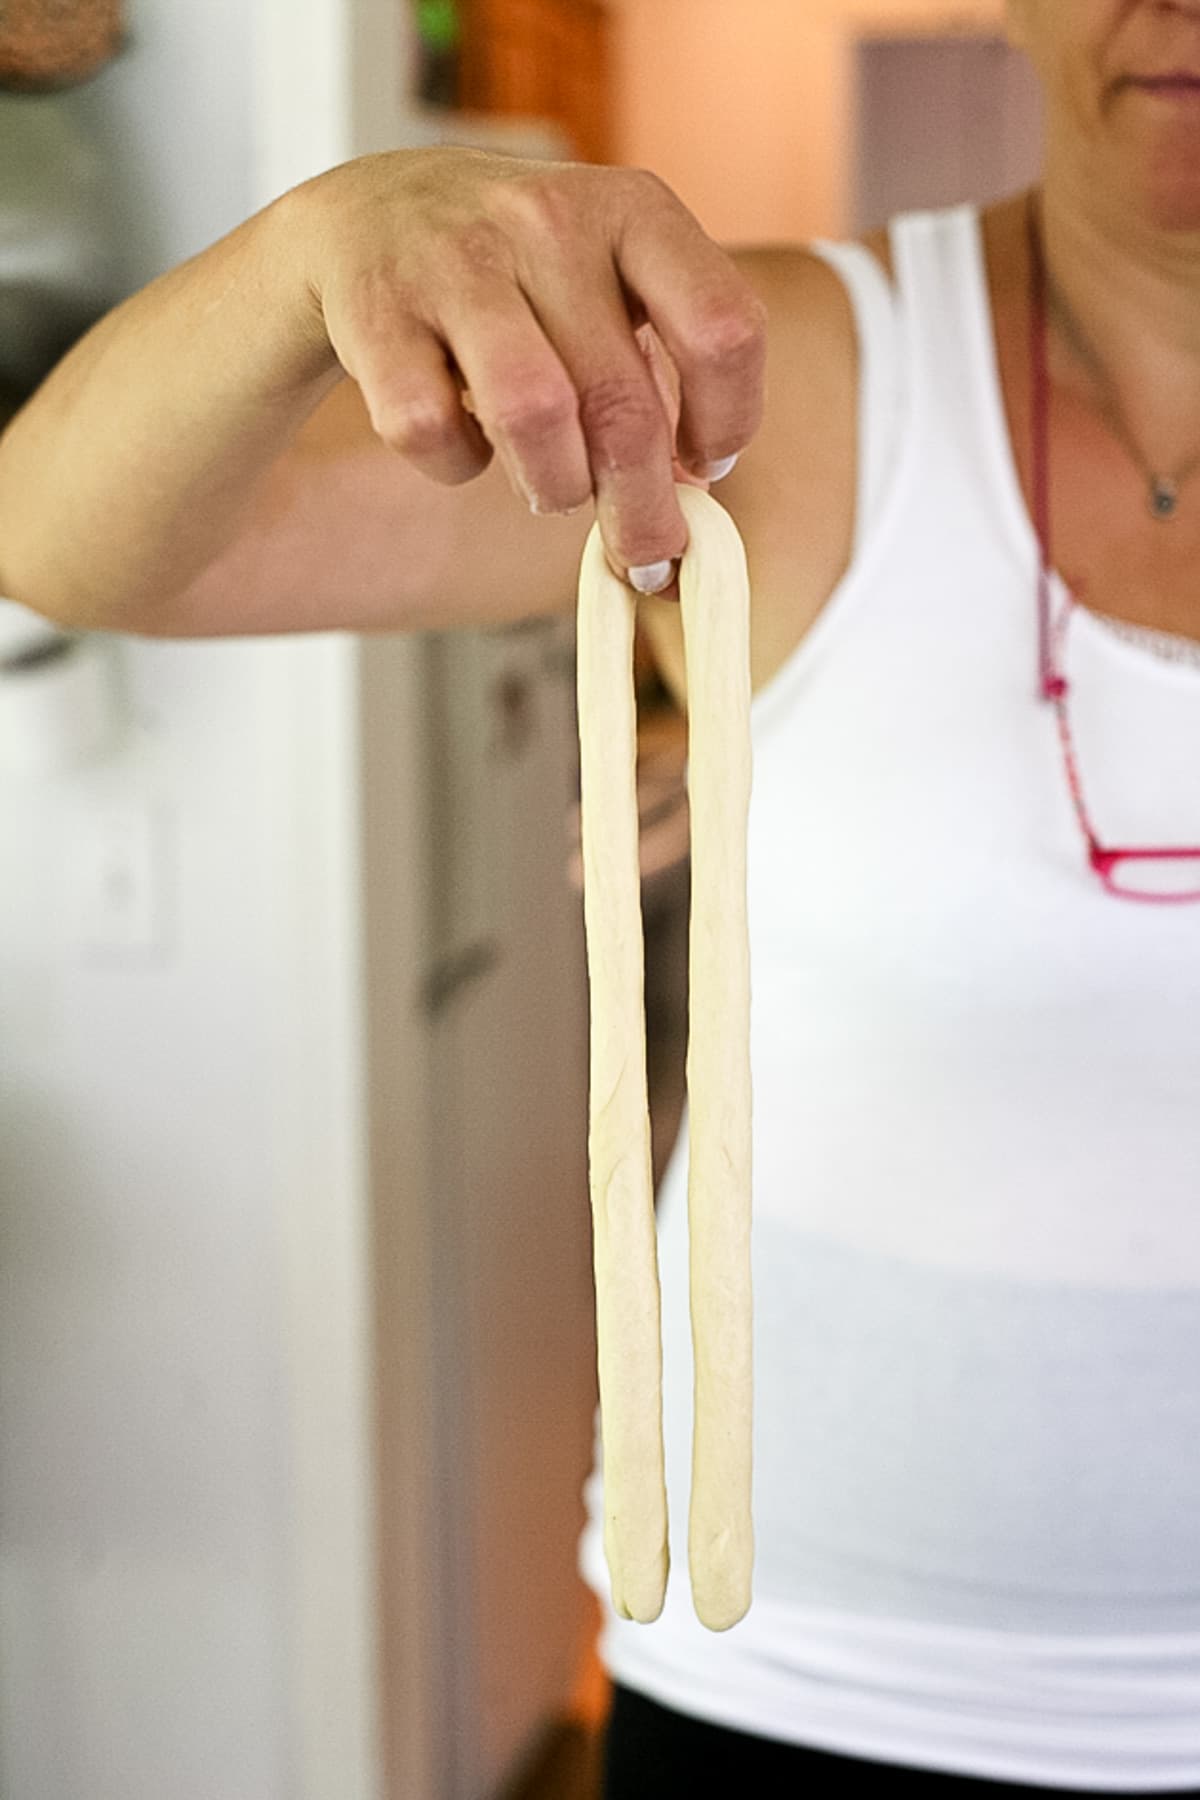 lift the strand of dough from it's middle